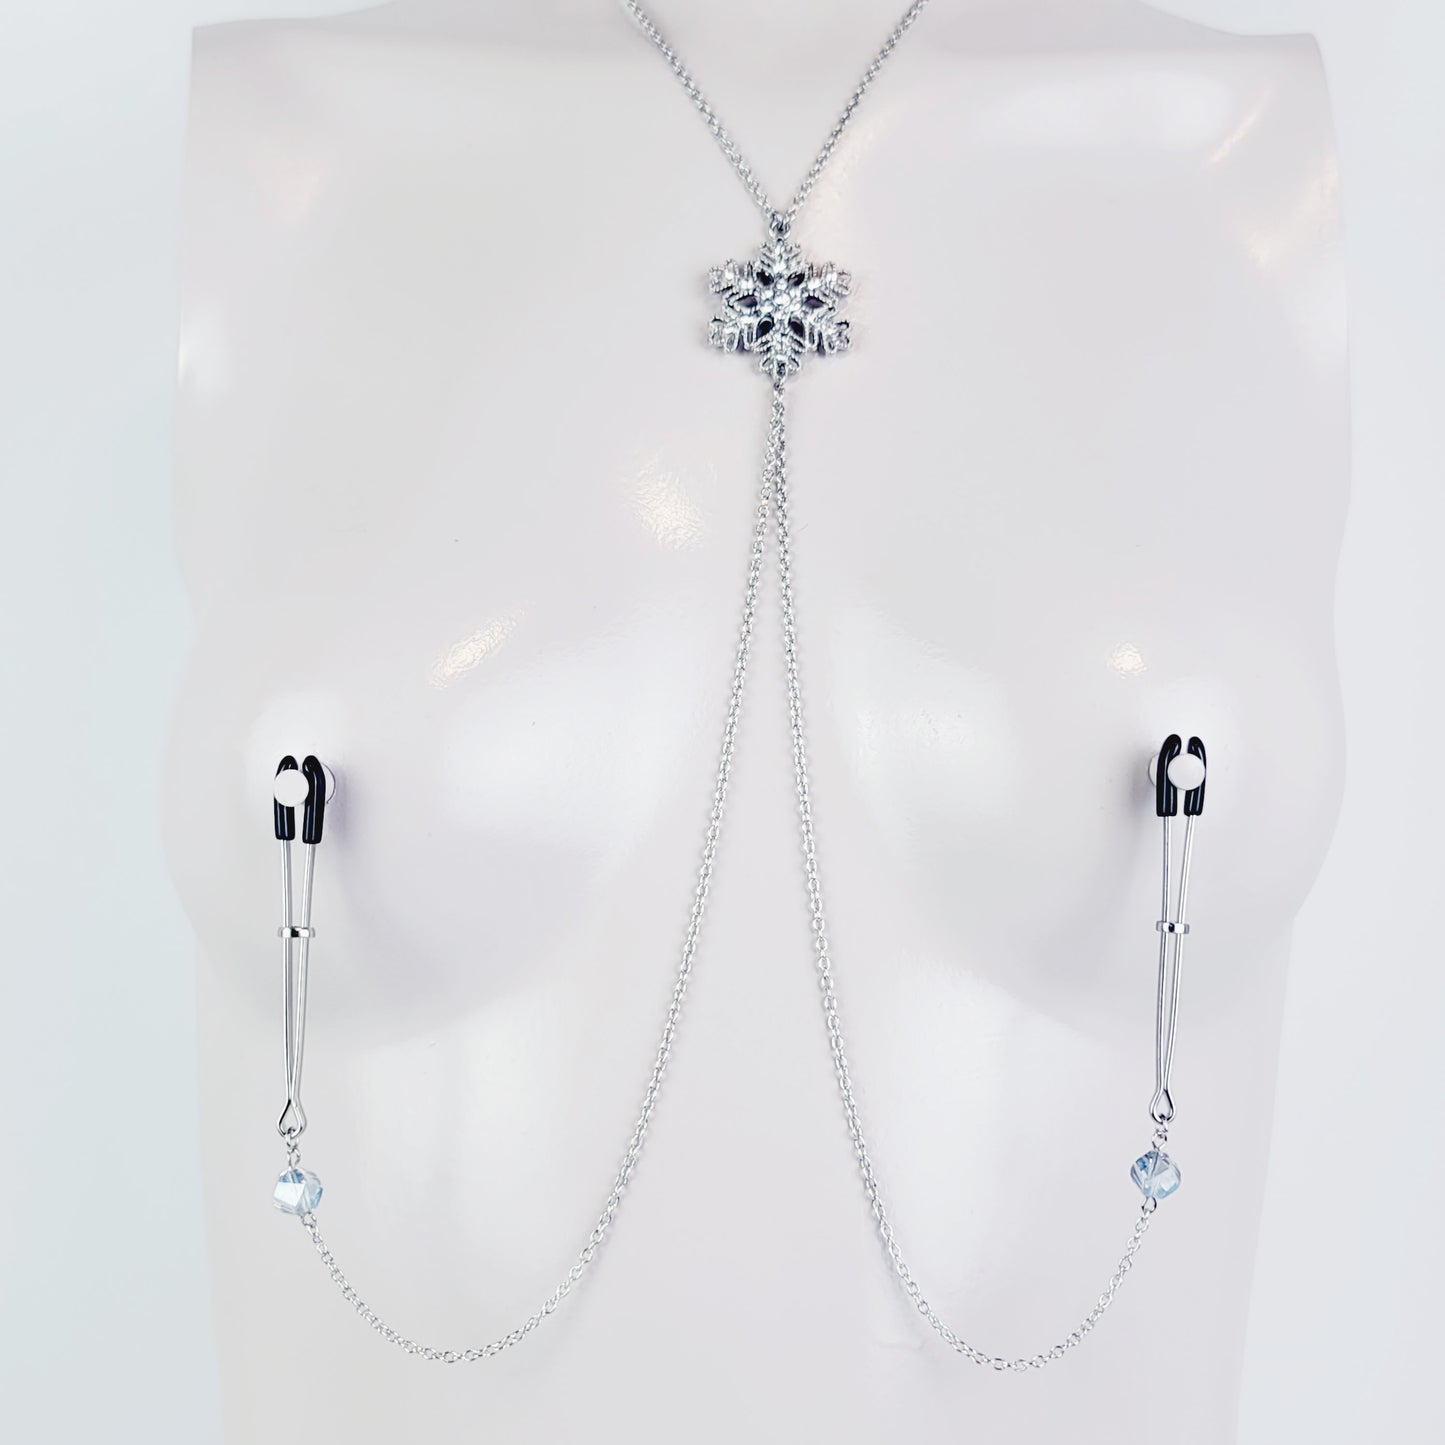 Snowflake Necklace to Nipple with Non Piercing Nipple Nooses or Your Choice of Nipple Clamps ( Tweezer Clamps shown). MATURE, BDSM